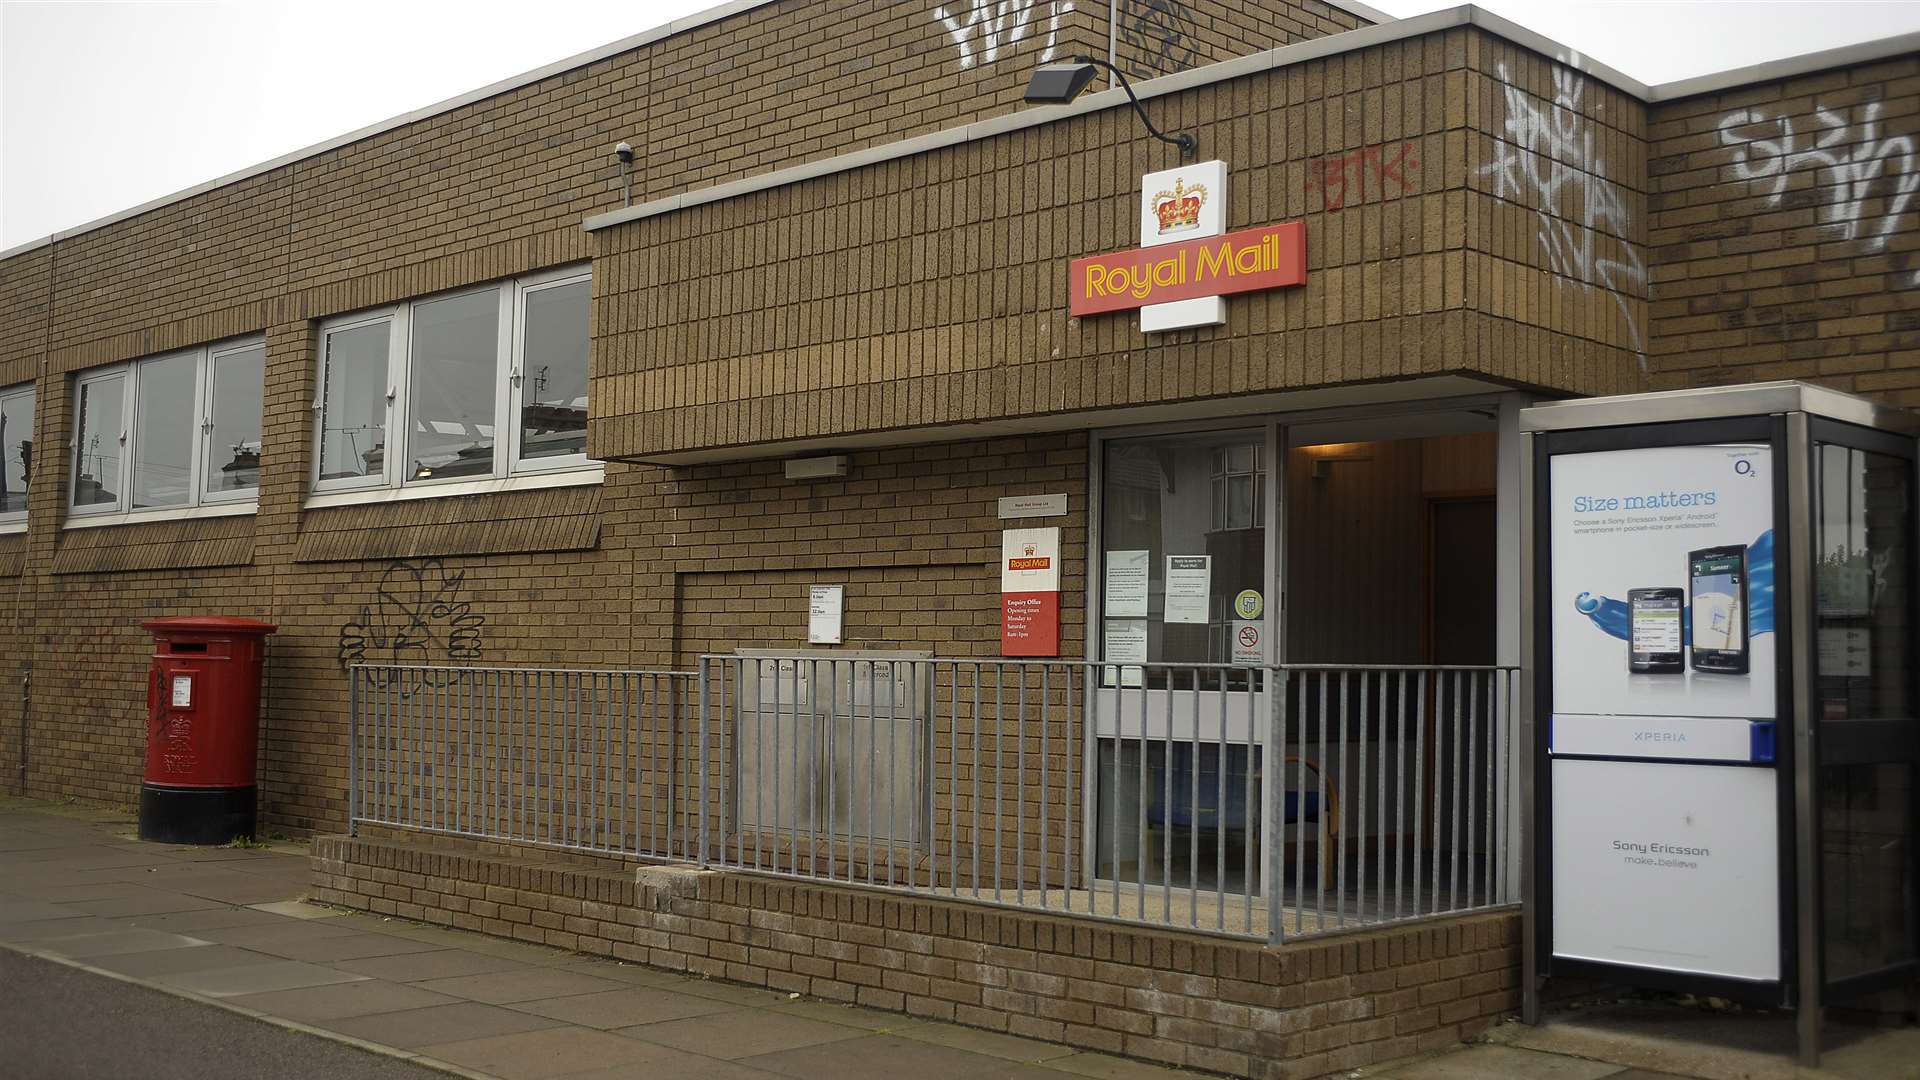 Royal Mail has confirmed it has completed the sale of its former Whitstable sorting office site